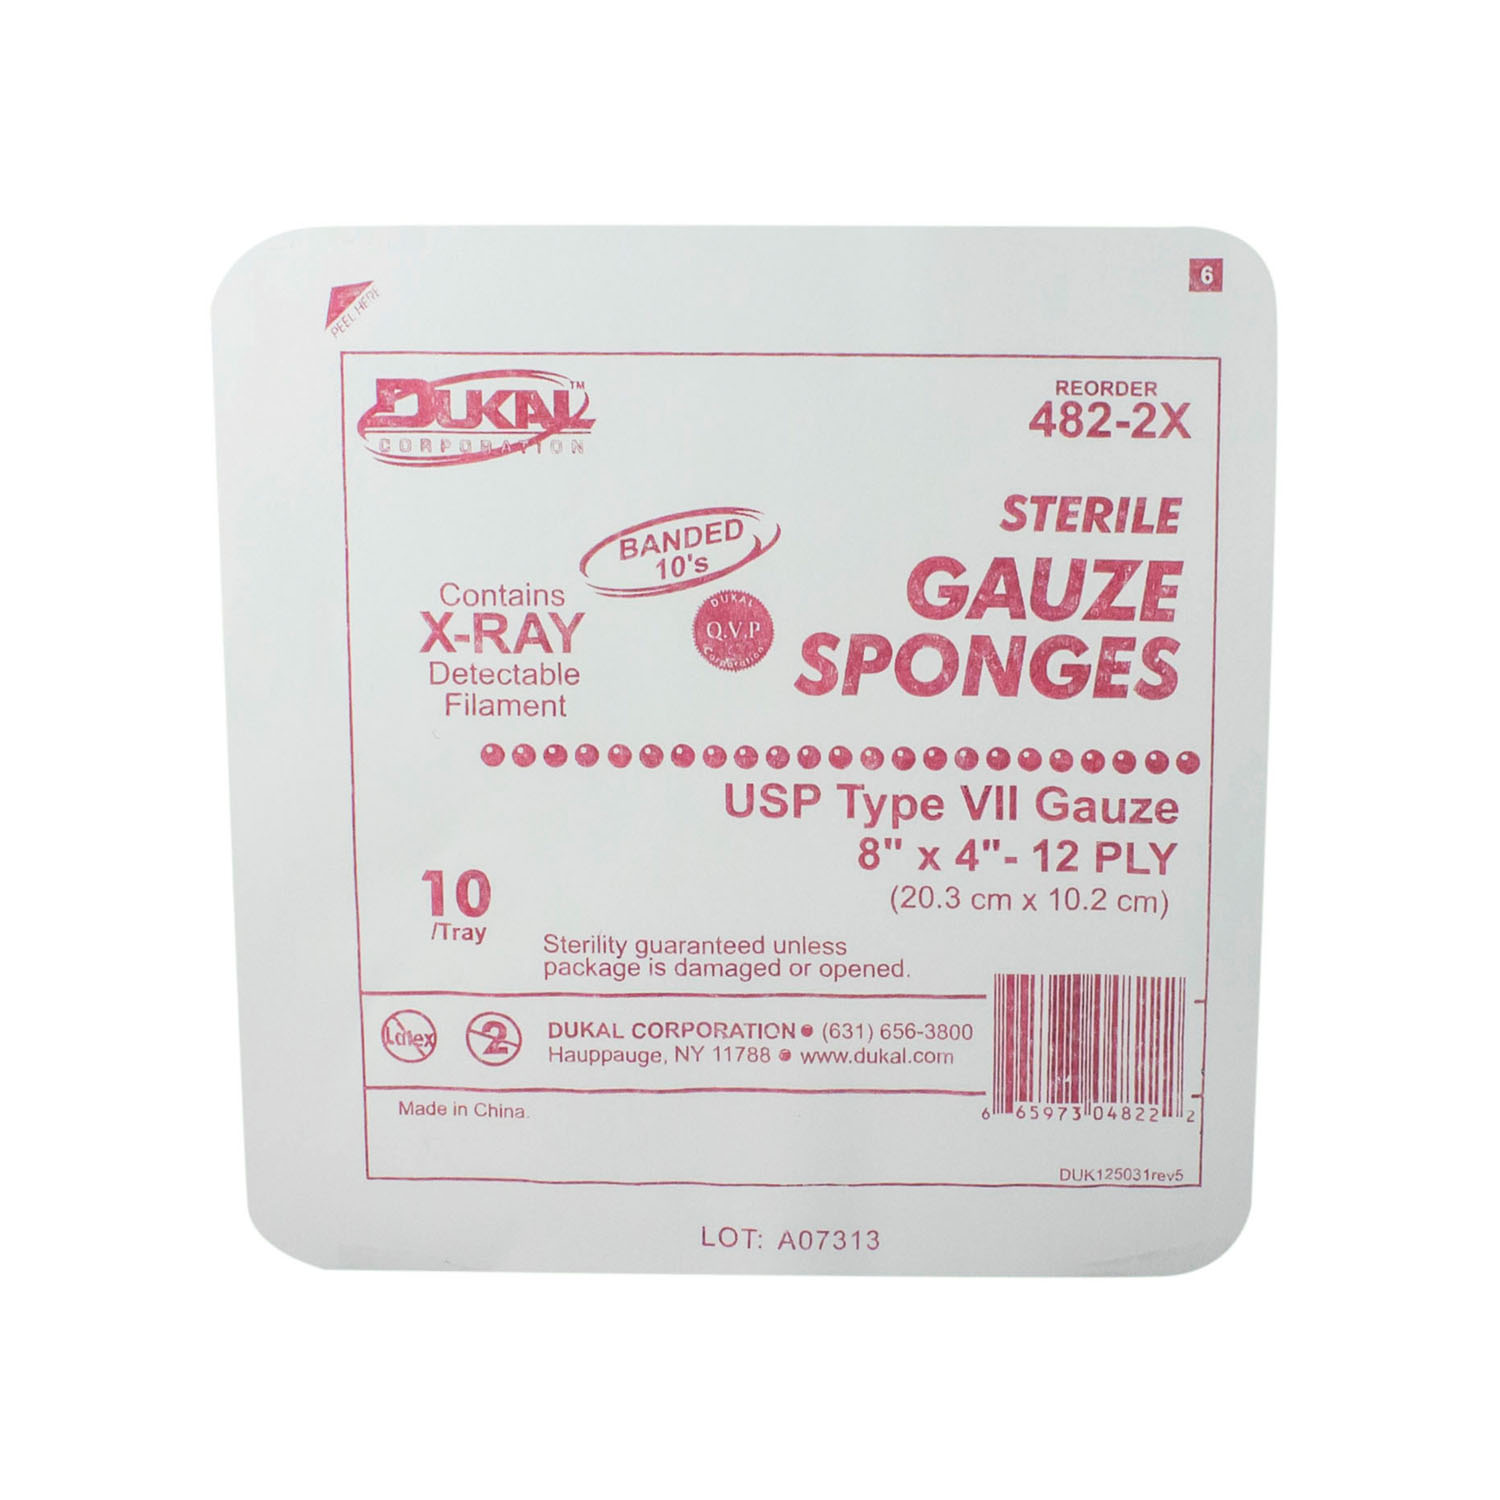 DUKAL X-RAY DETECTABLE GAUZE SPONGES : 482-2X TR $3.12 Stocked